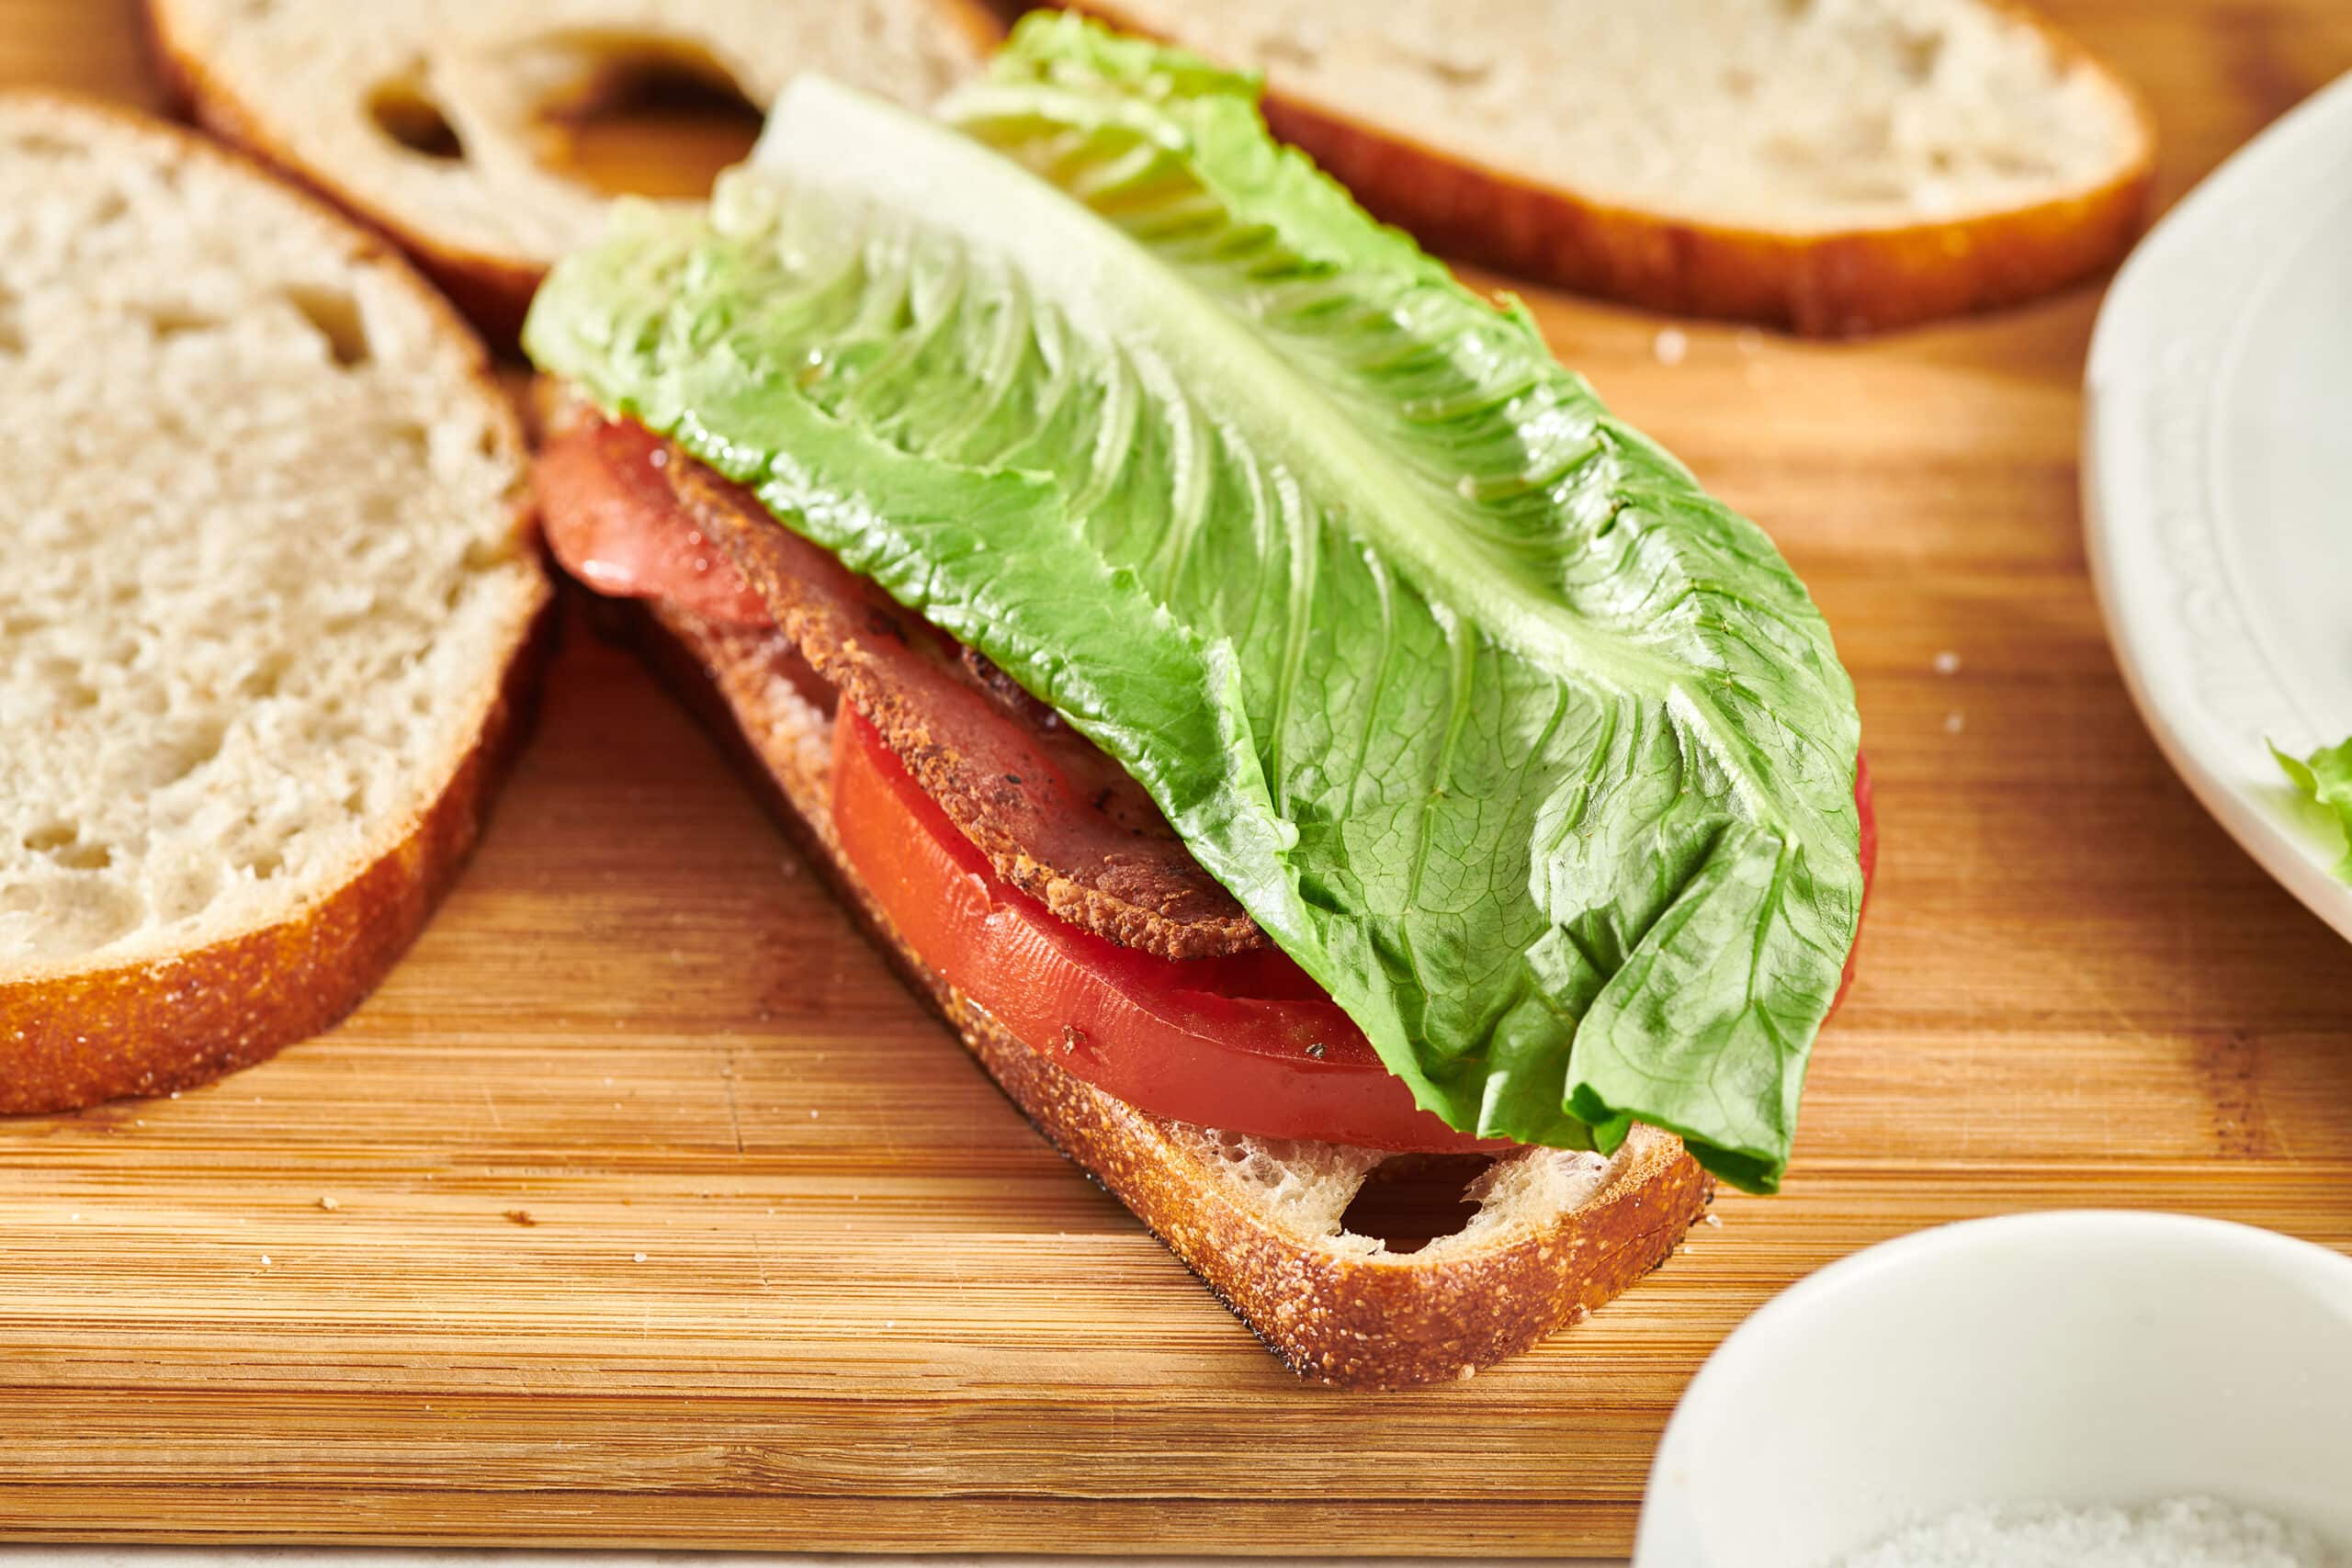 An open sandwich on a wooden cutting board with a piece of lettuce on top of a bacon and sliced tomato on bread.  